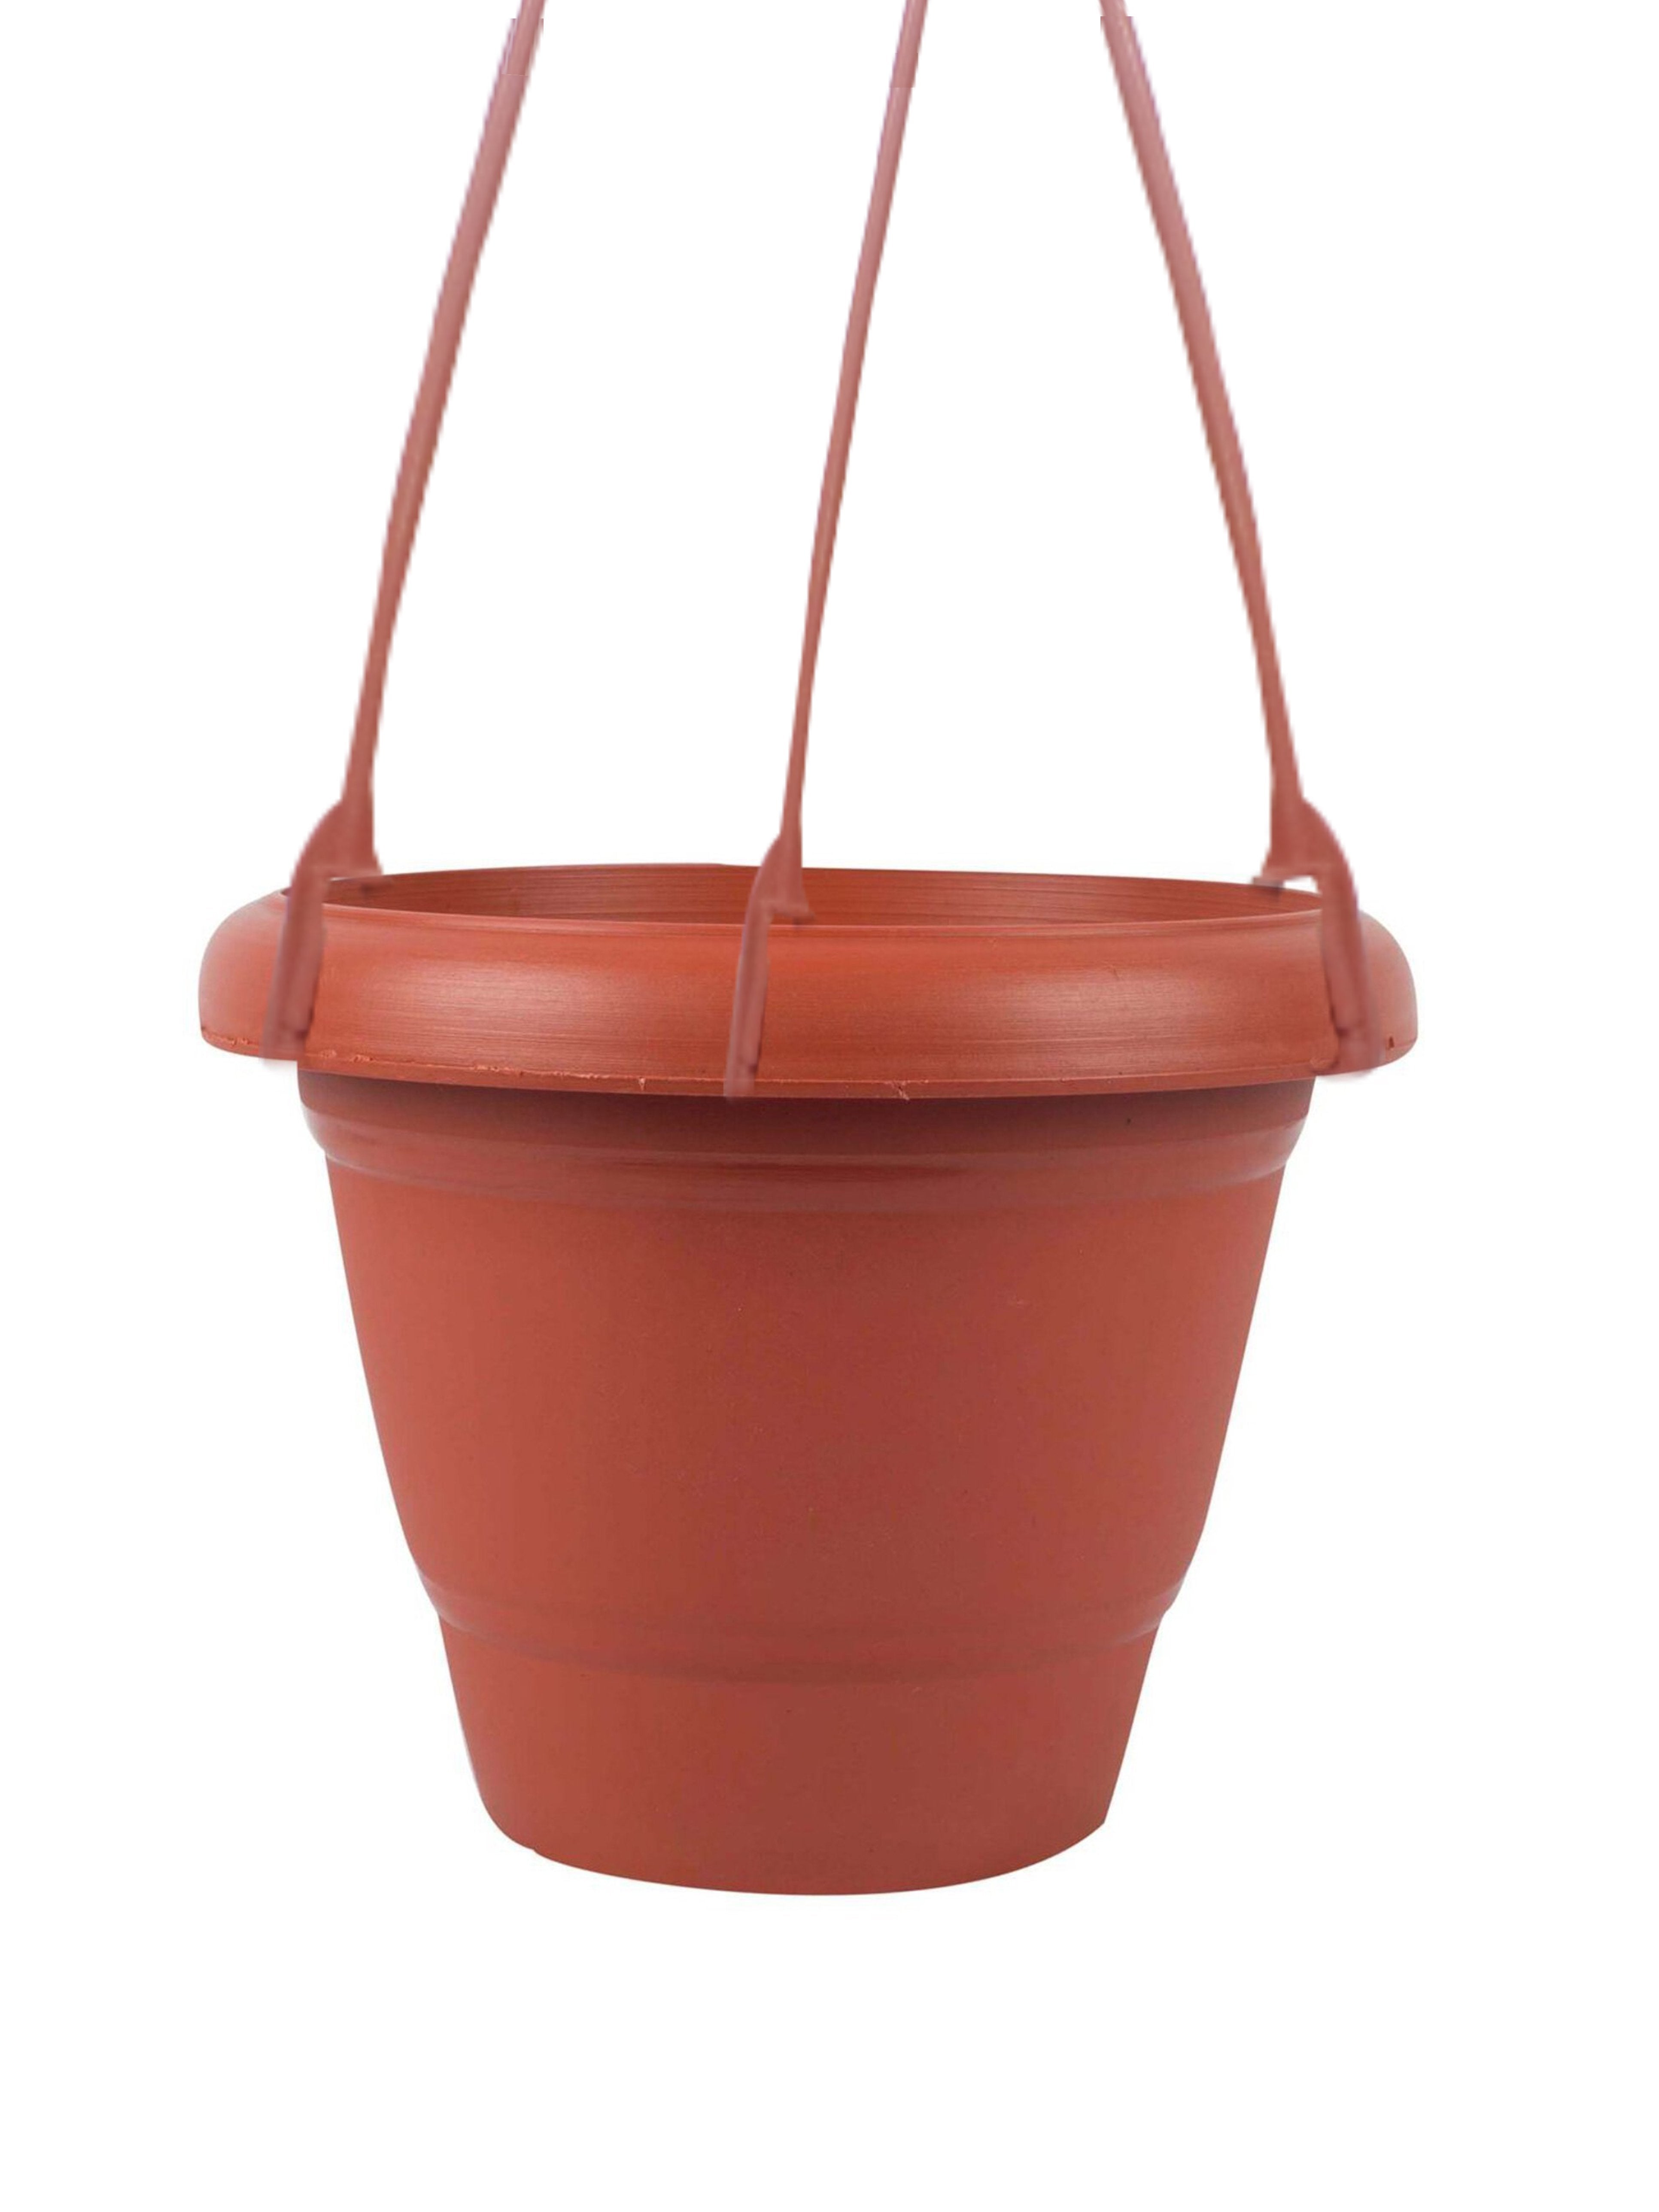 0840 hanging flower pot with hanging roap